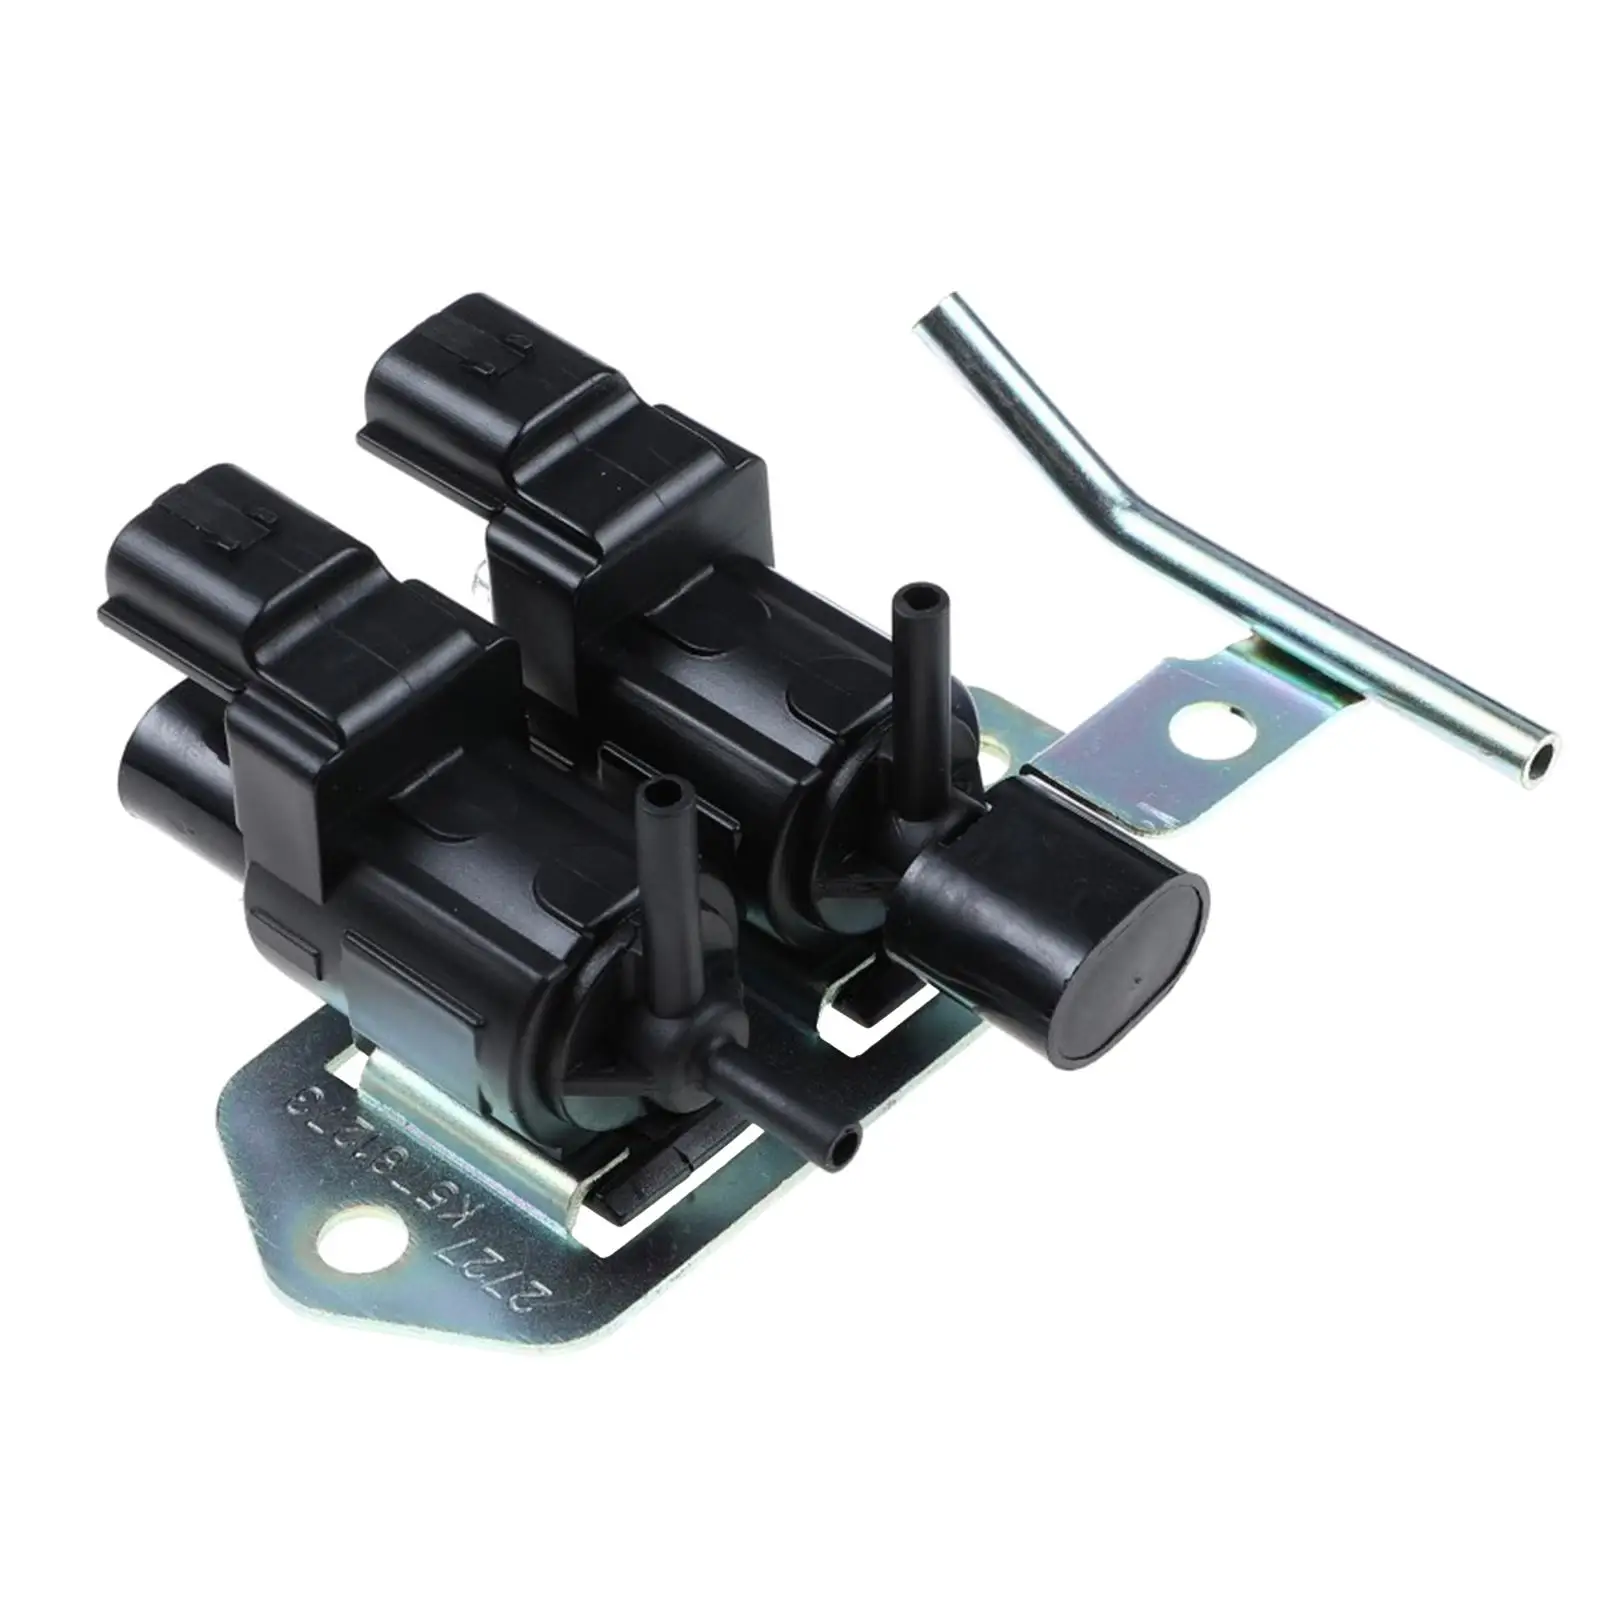 Automotive Clutch 4WD Select Control Solenoid Valve Replace K5T81273 Fit for Mitsubishi Montero Pinin 1999-2005 4G93 4G94